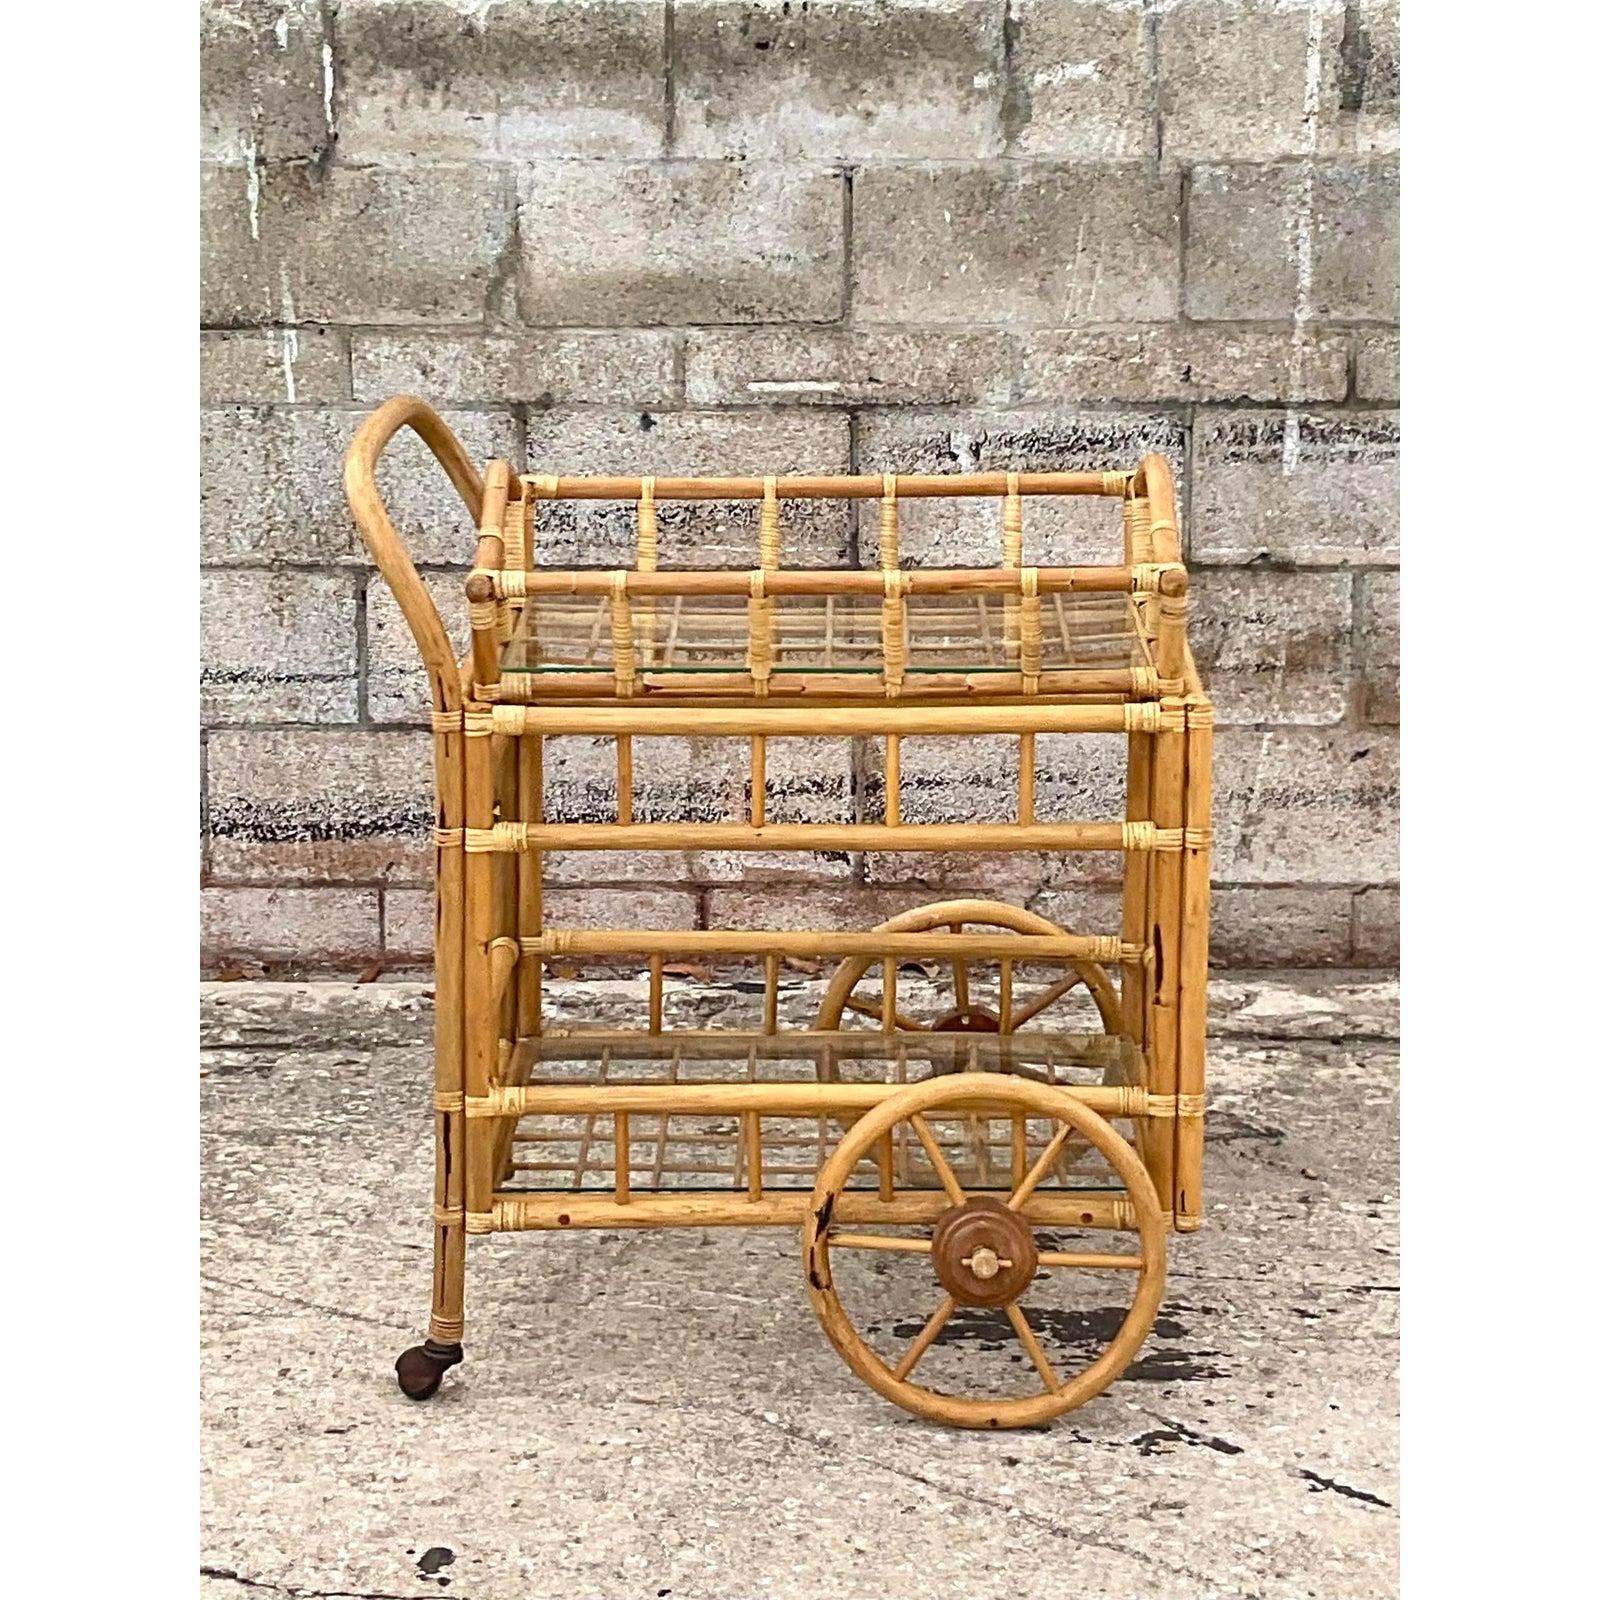 Fantastic vintage bent rattan bar cart. Beautiful, removable tray top makes it beautiful and functional. Unusual and attractive. Acquired from Palm Beach estate.